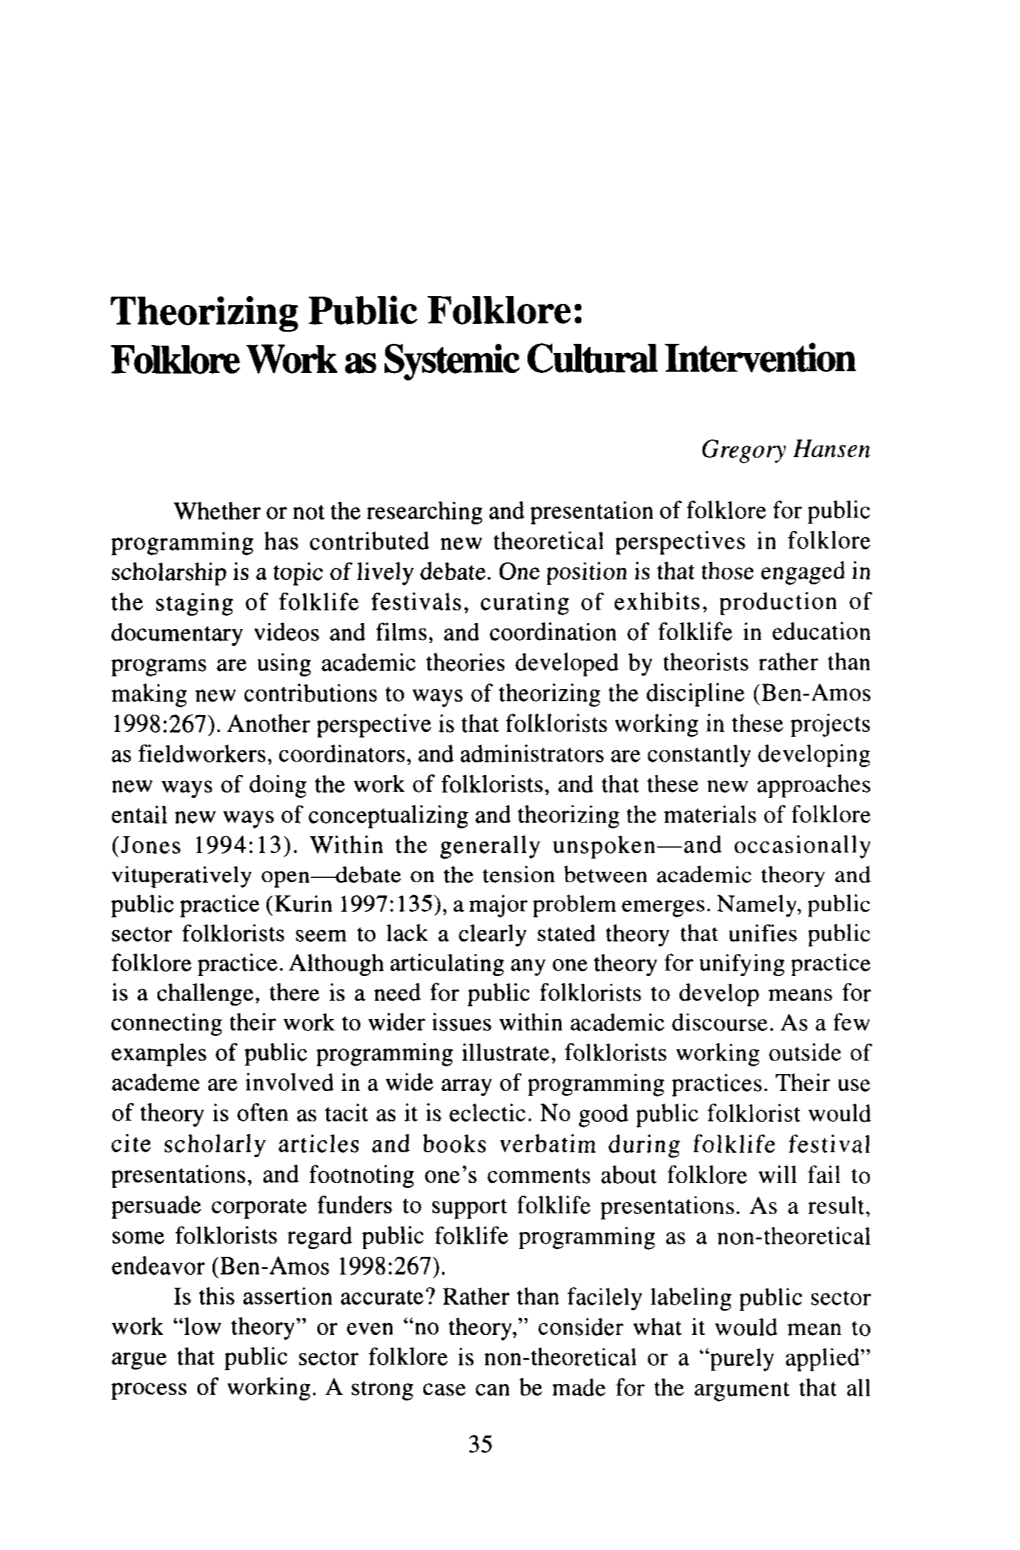 Theorizing Public Folklore: Folklore Work As Systemic Cultural Intervention